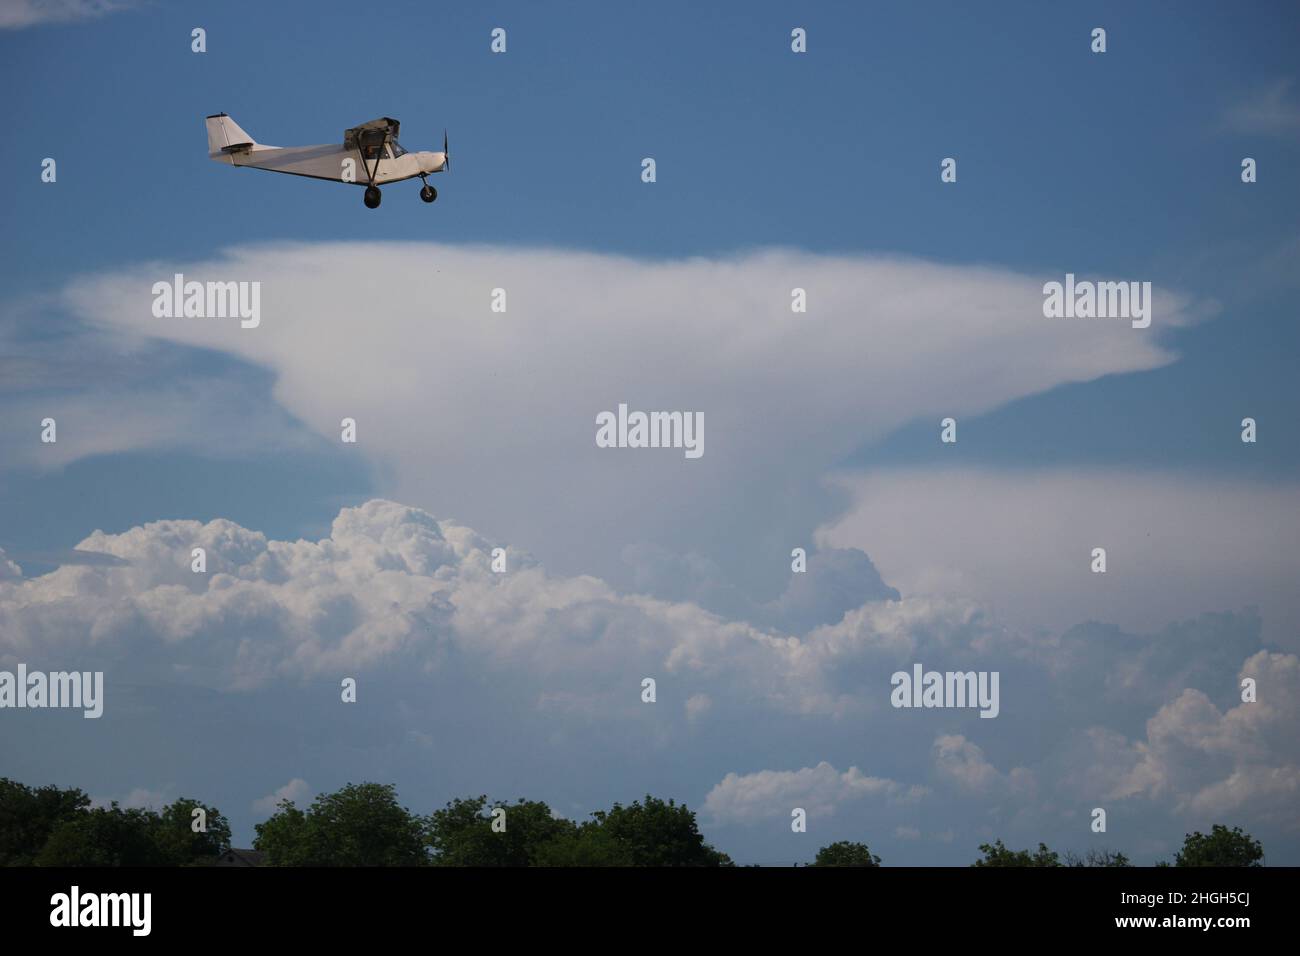 Small private single-propeller plane against the blue cloudy sky. Stock Photo